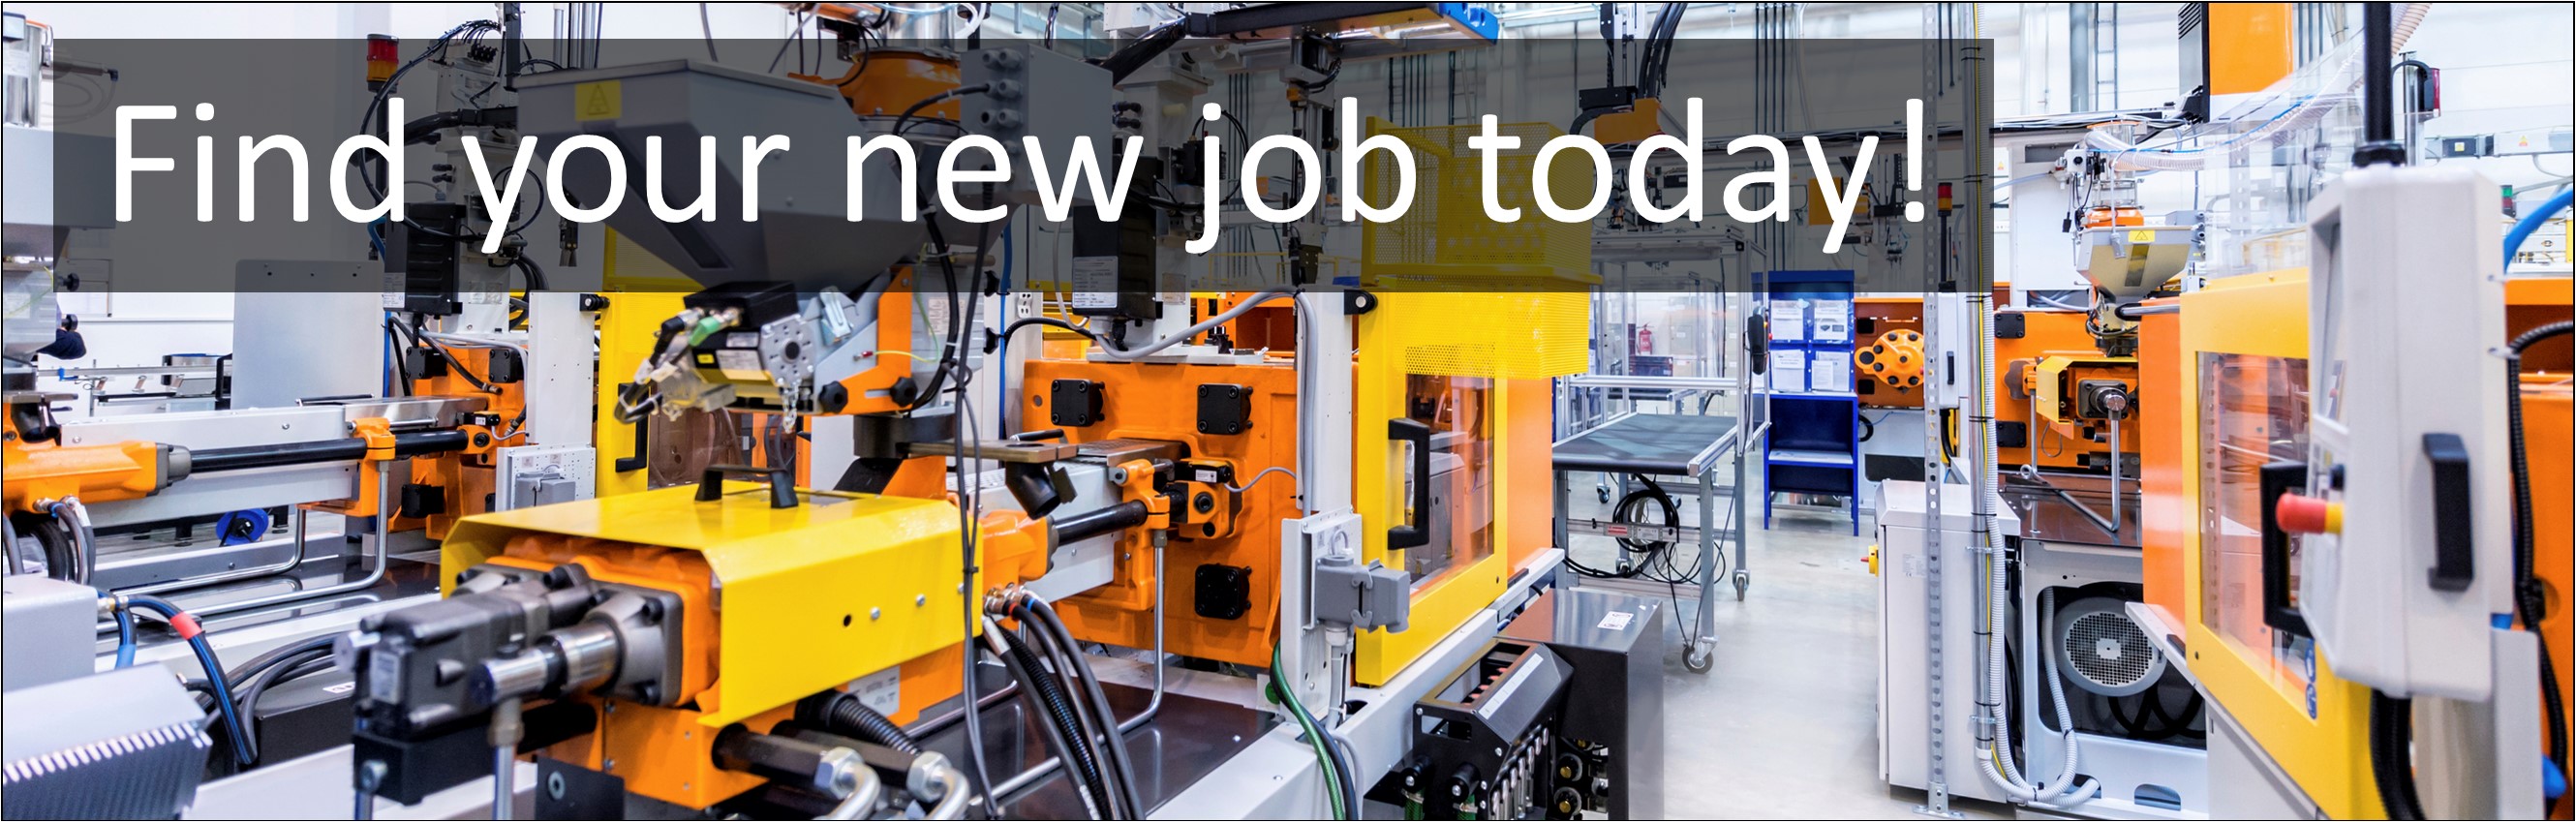 Manufacturing Jobs. Textiles Production Manager Jobs, Careers & Vacancies in Birkenhead, Wirral, North West England Advertised by AWD online – Multi-Job Board Advertising and CV Sourcing Recruitment Services